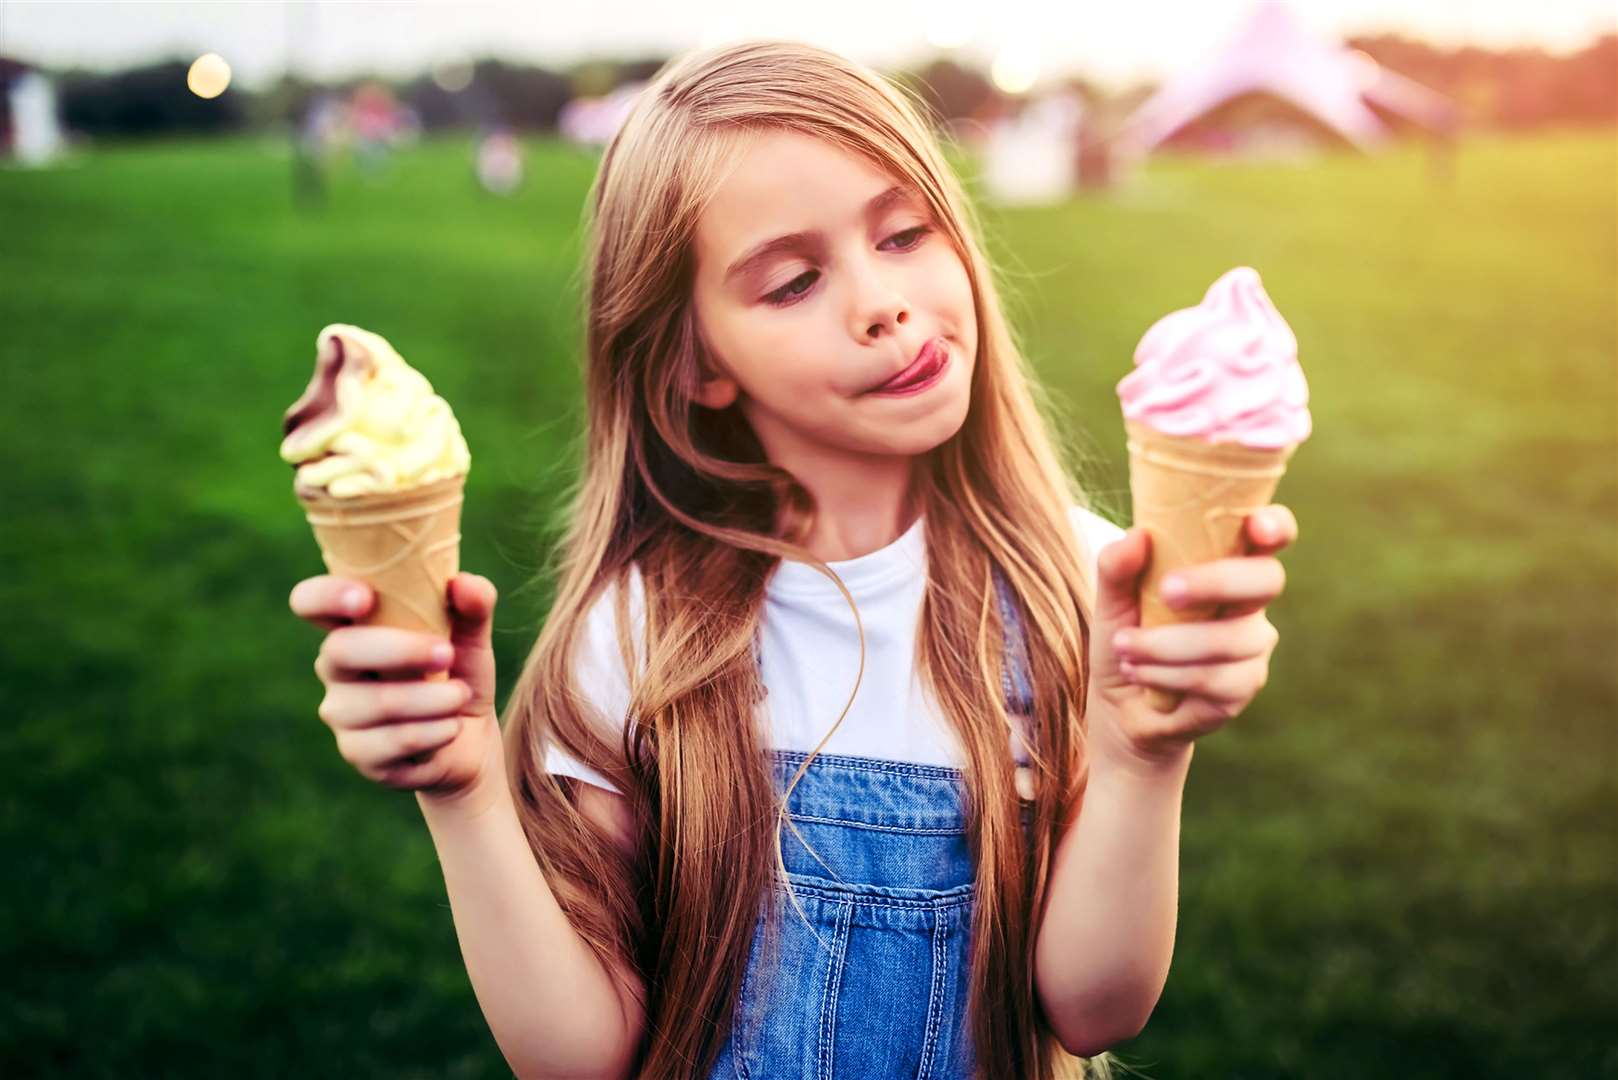 Unilever says 12 ice creams are, on average, ordered every second in the UK during summer